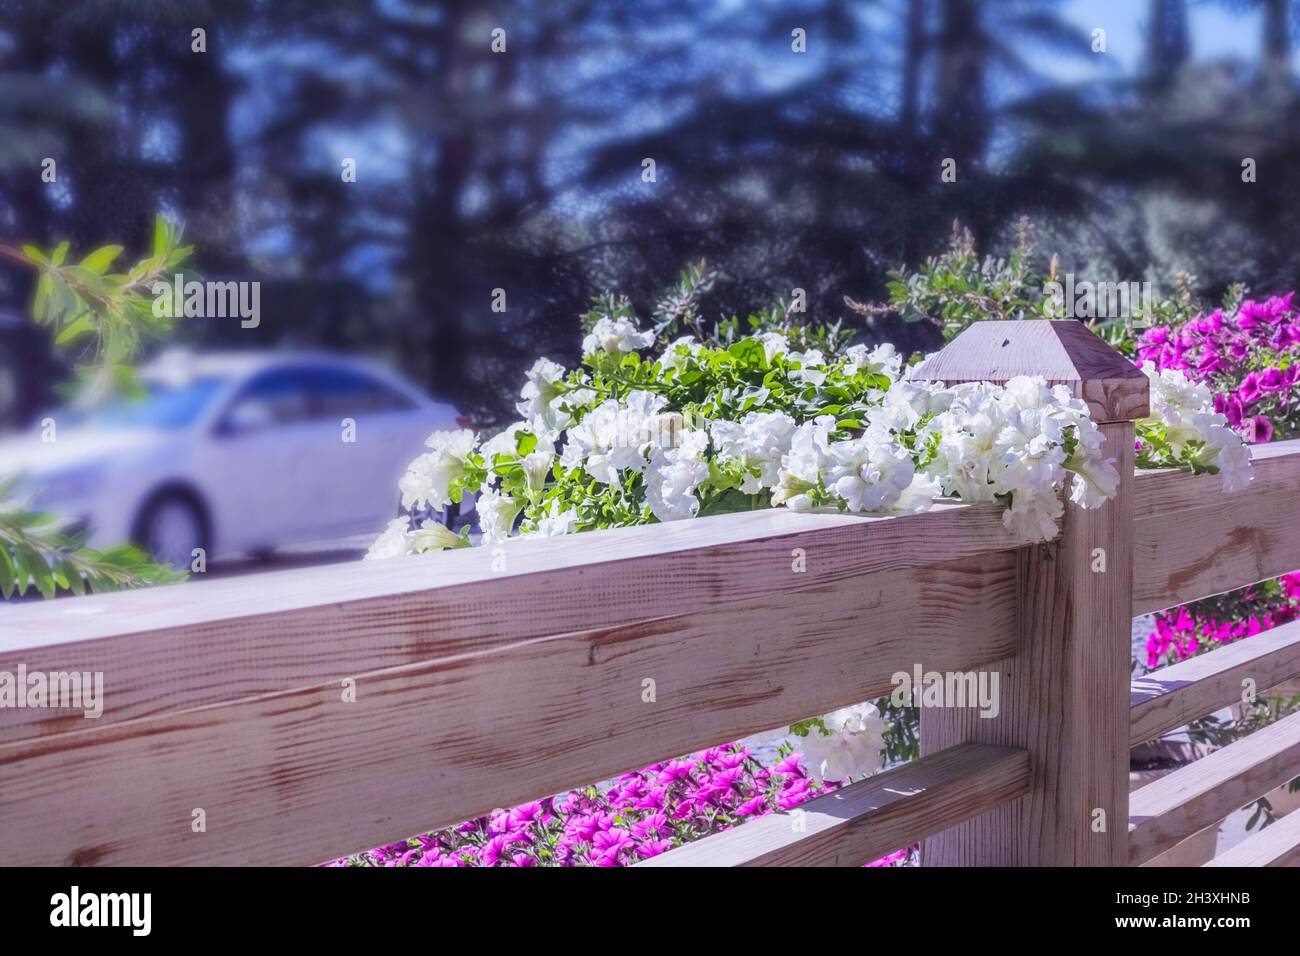 Pretty decorative petunias on wooden fence with white car on background Stock Photo